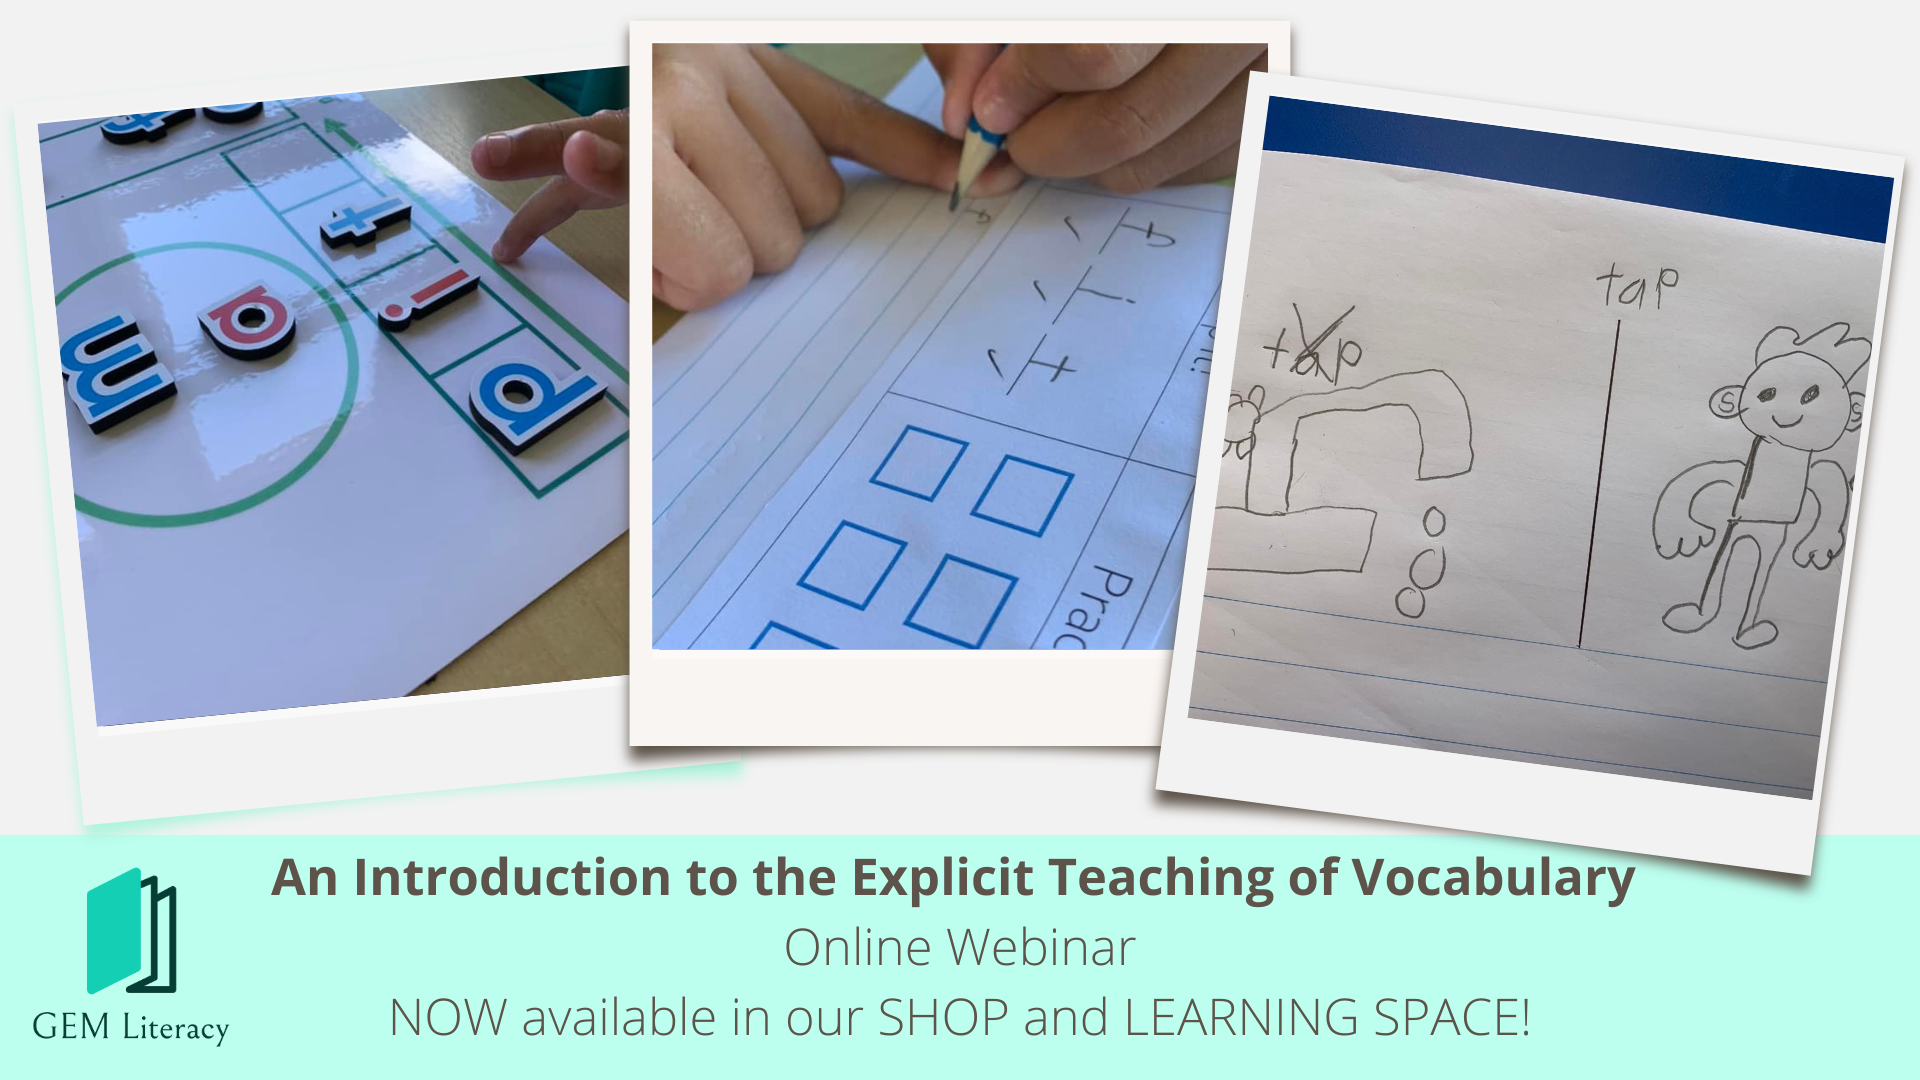 An Introduction to the Explicit Teaching of Vocabulary